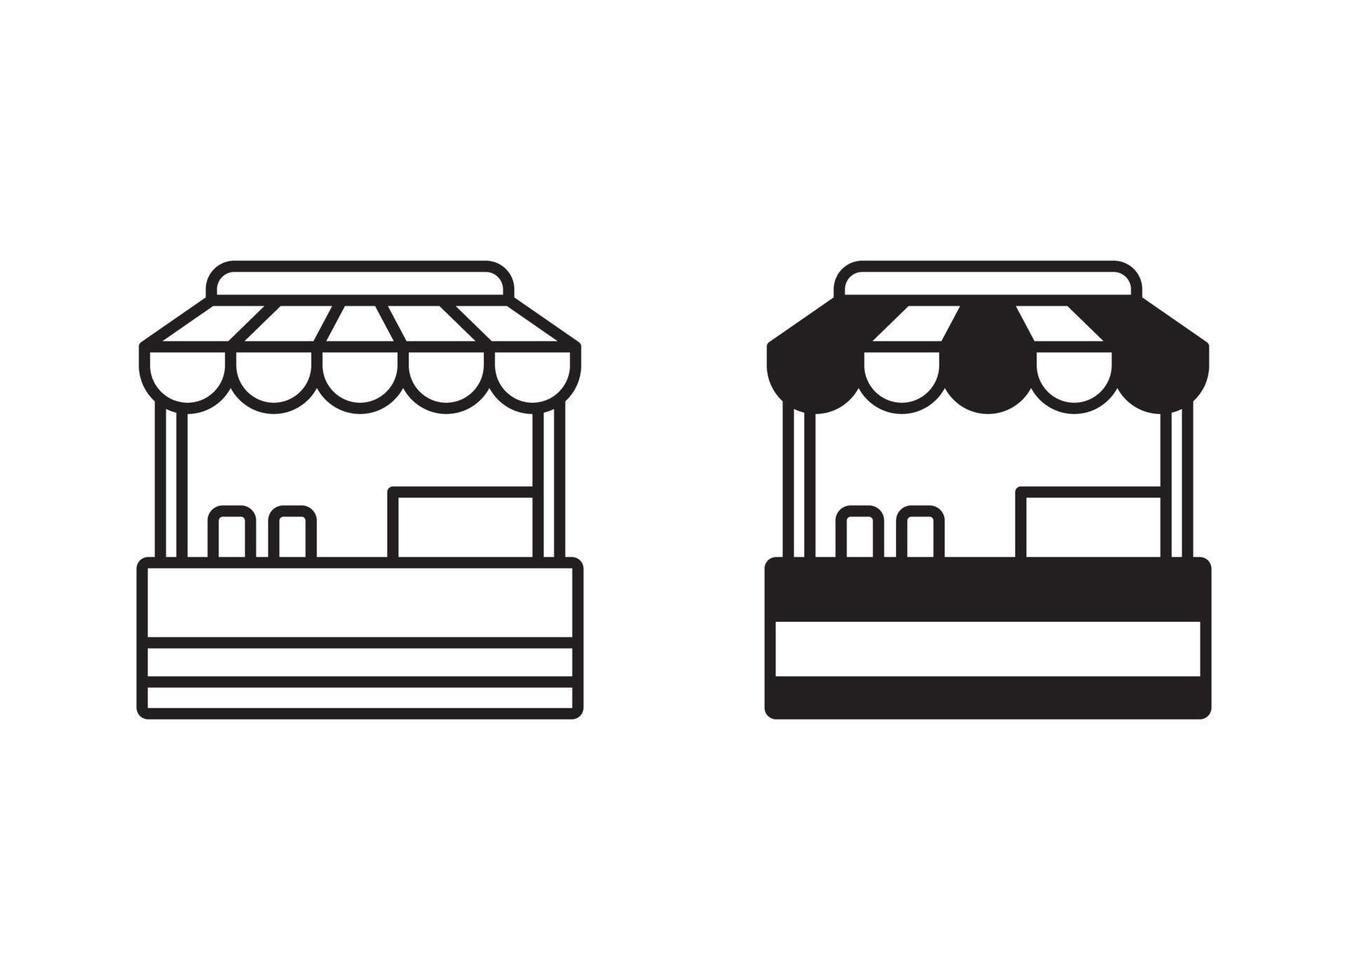 Street food stall icon with black and white design on isolated background vector